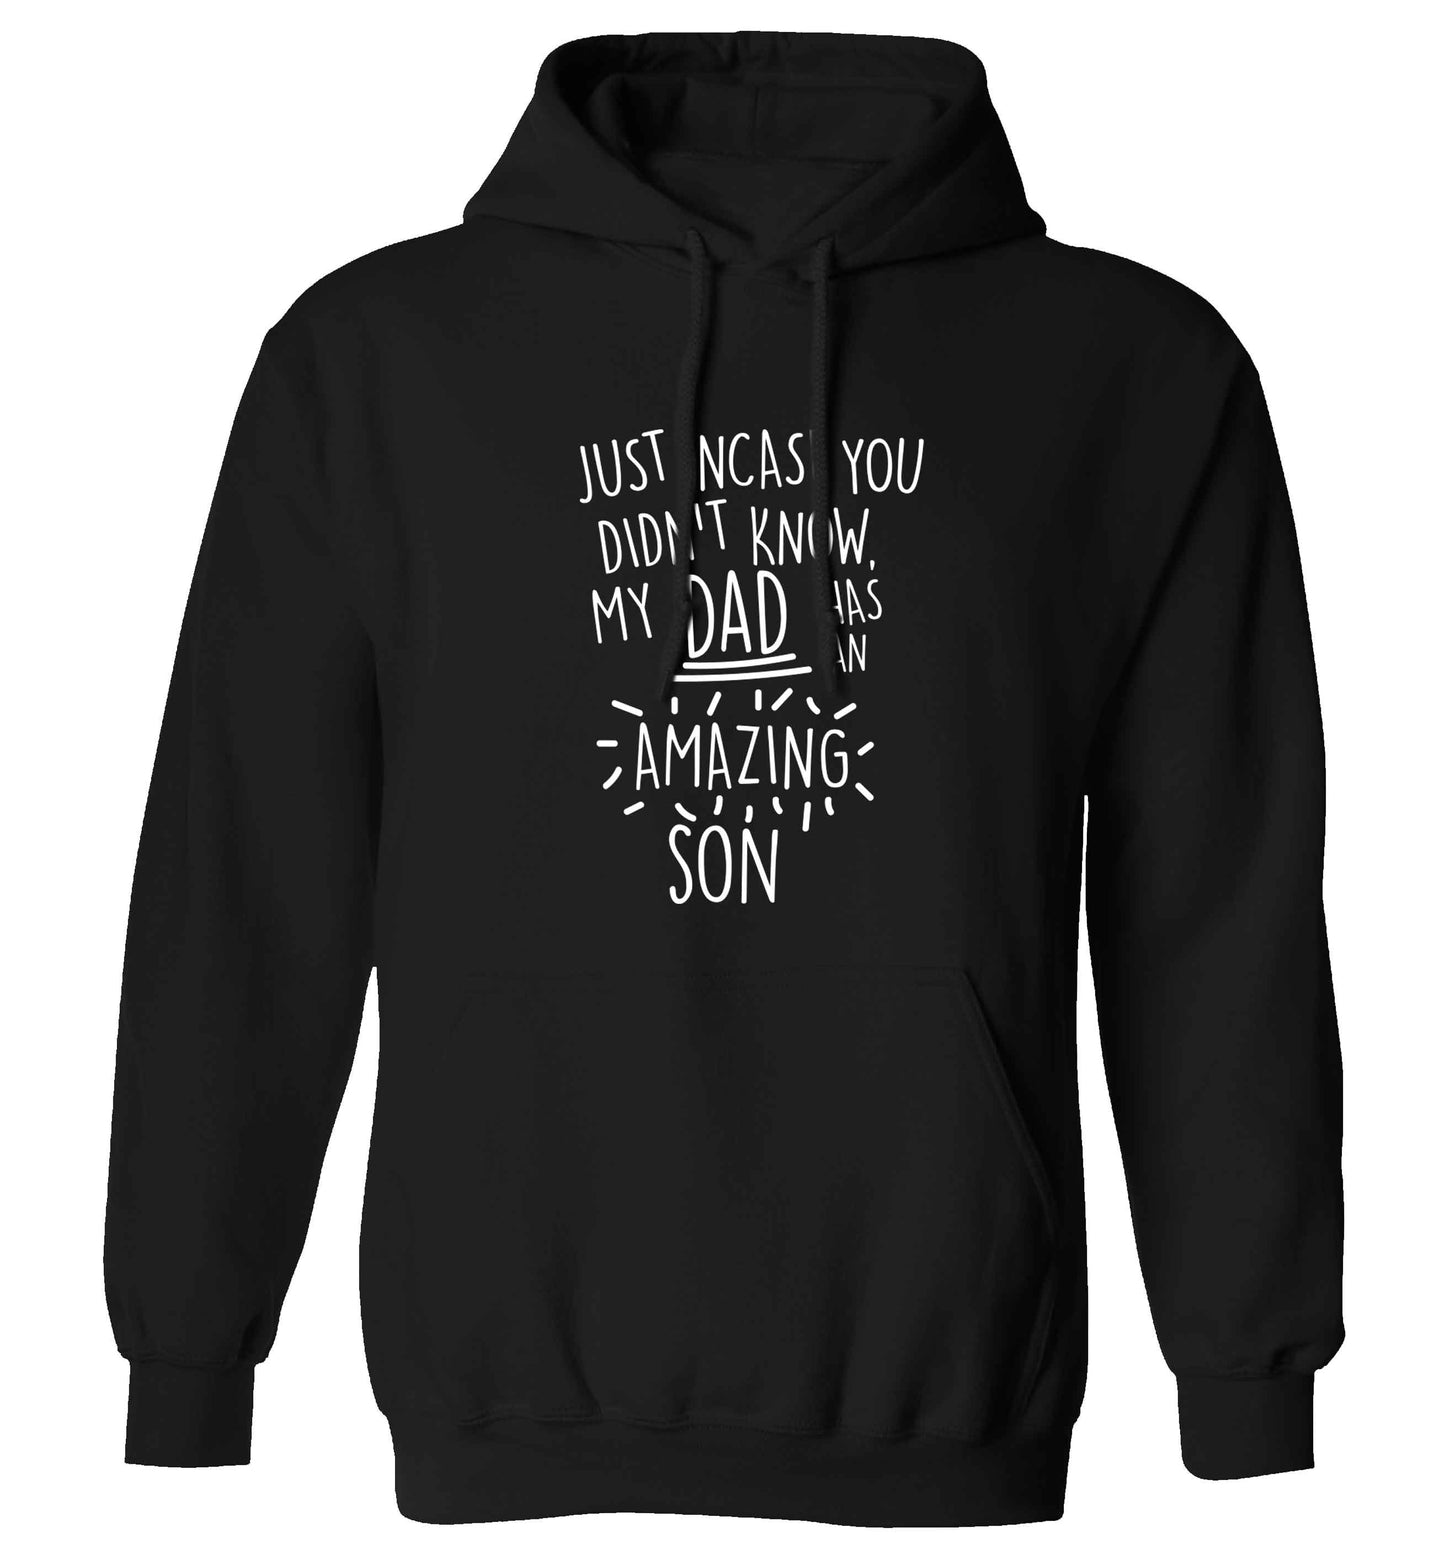 Just incase you didn't know my dad has an amazing son adults unisex black hoodie 2XL